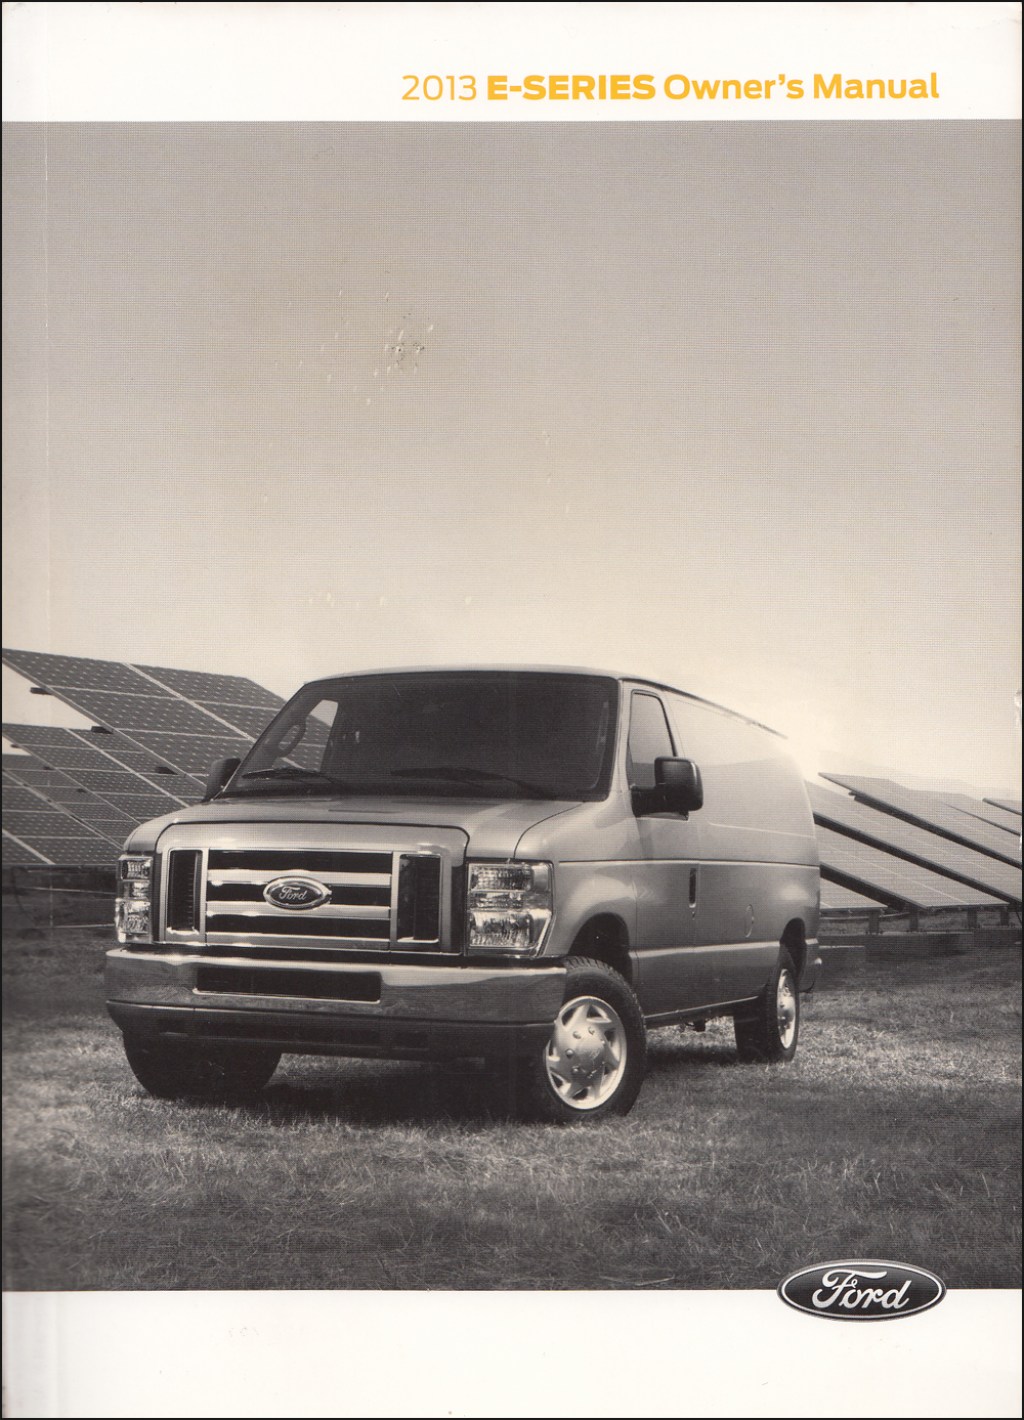 Picture of: Ford E-Series Econoline Owner’s Manual Original